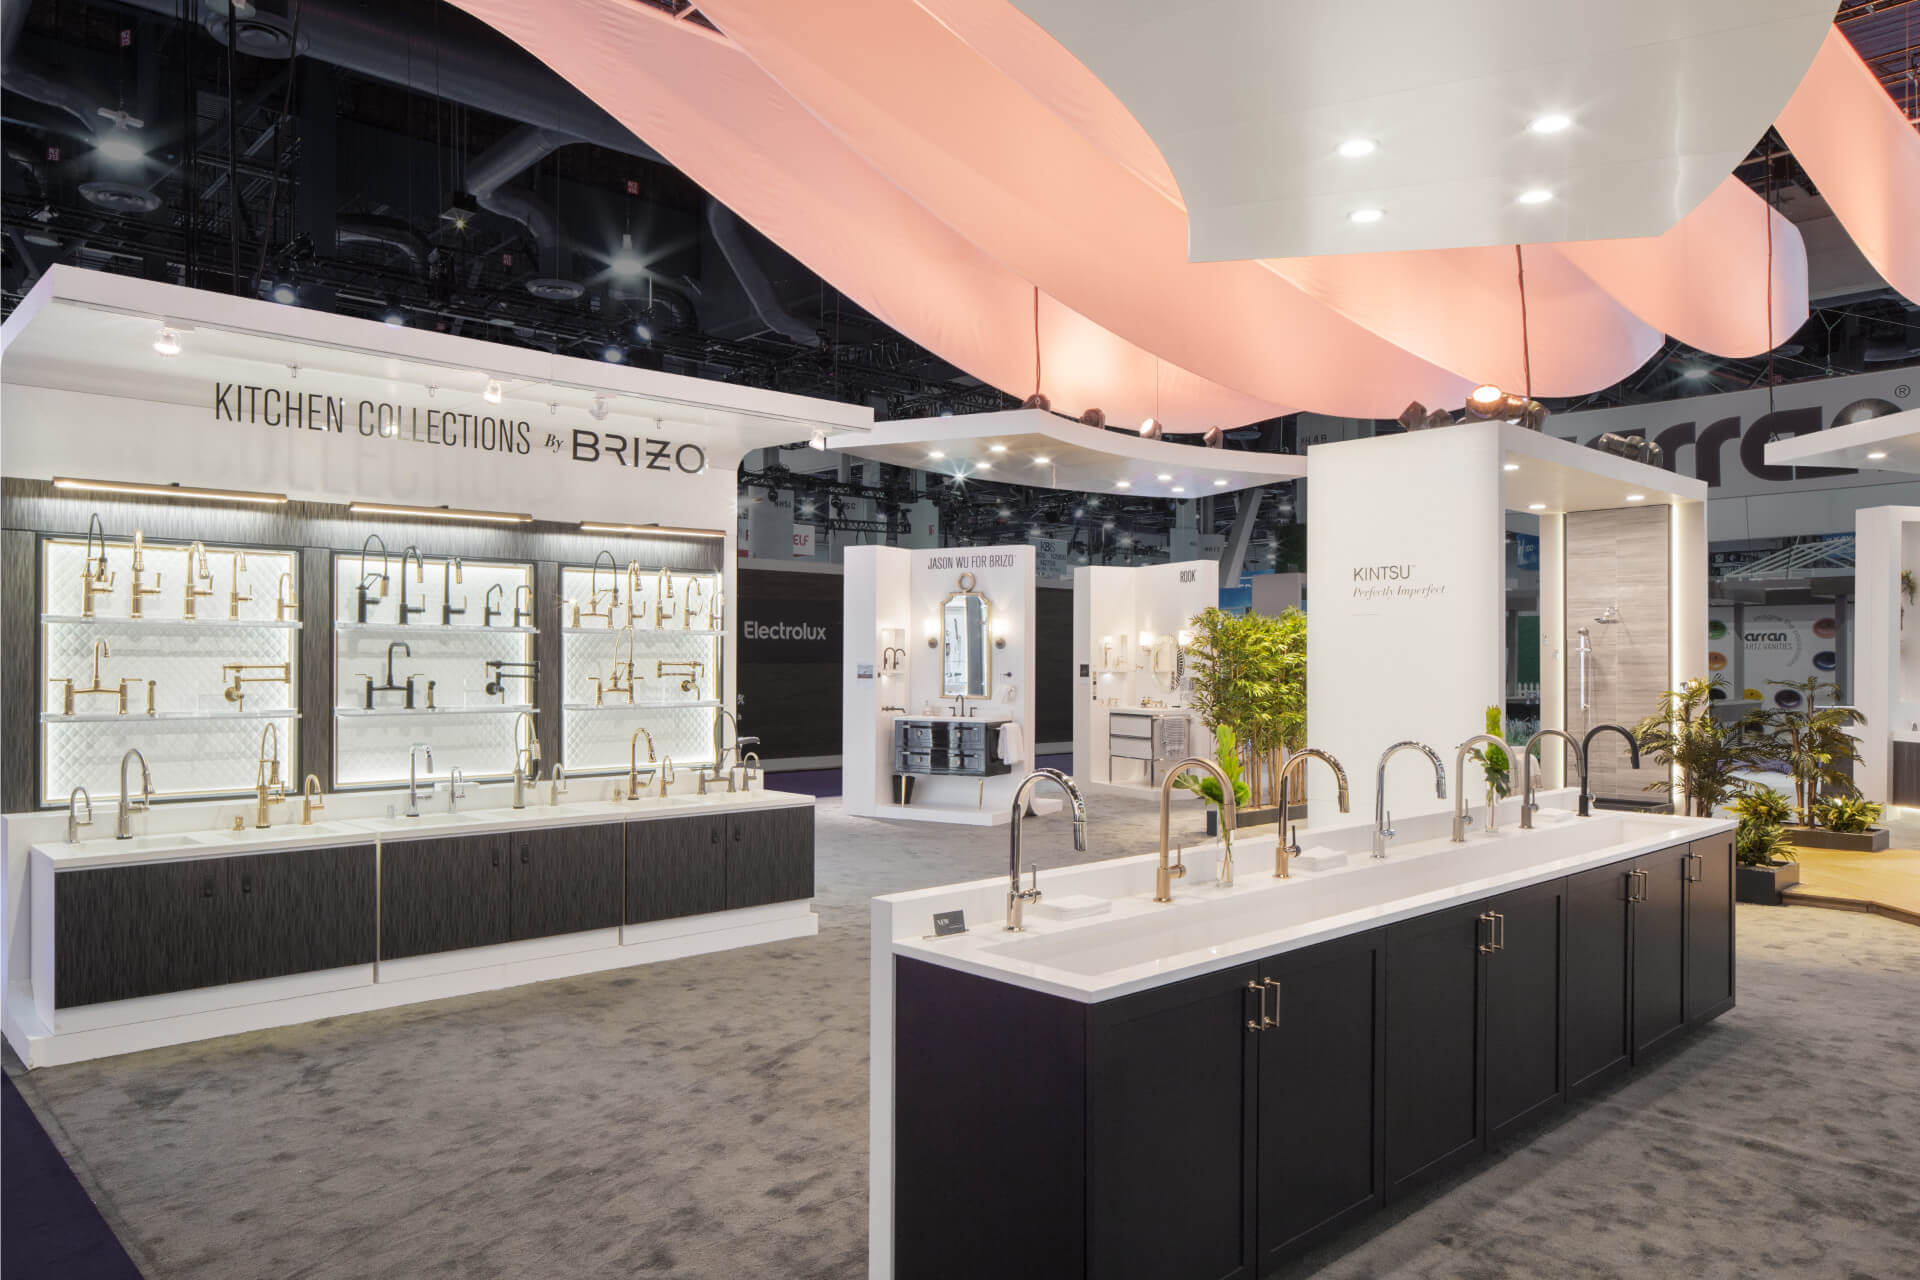 Brizo trade show exhibit at KBIS merchandising displays with bright lights